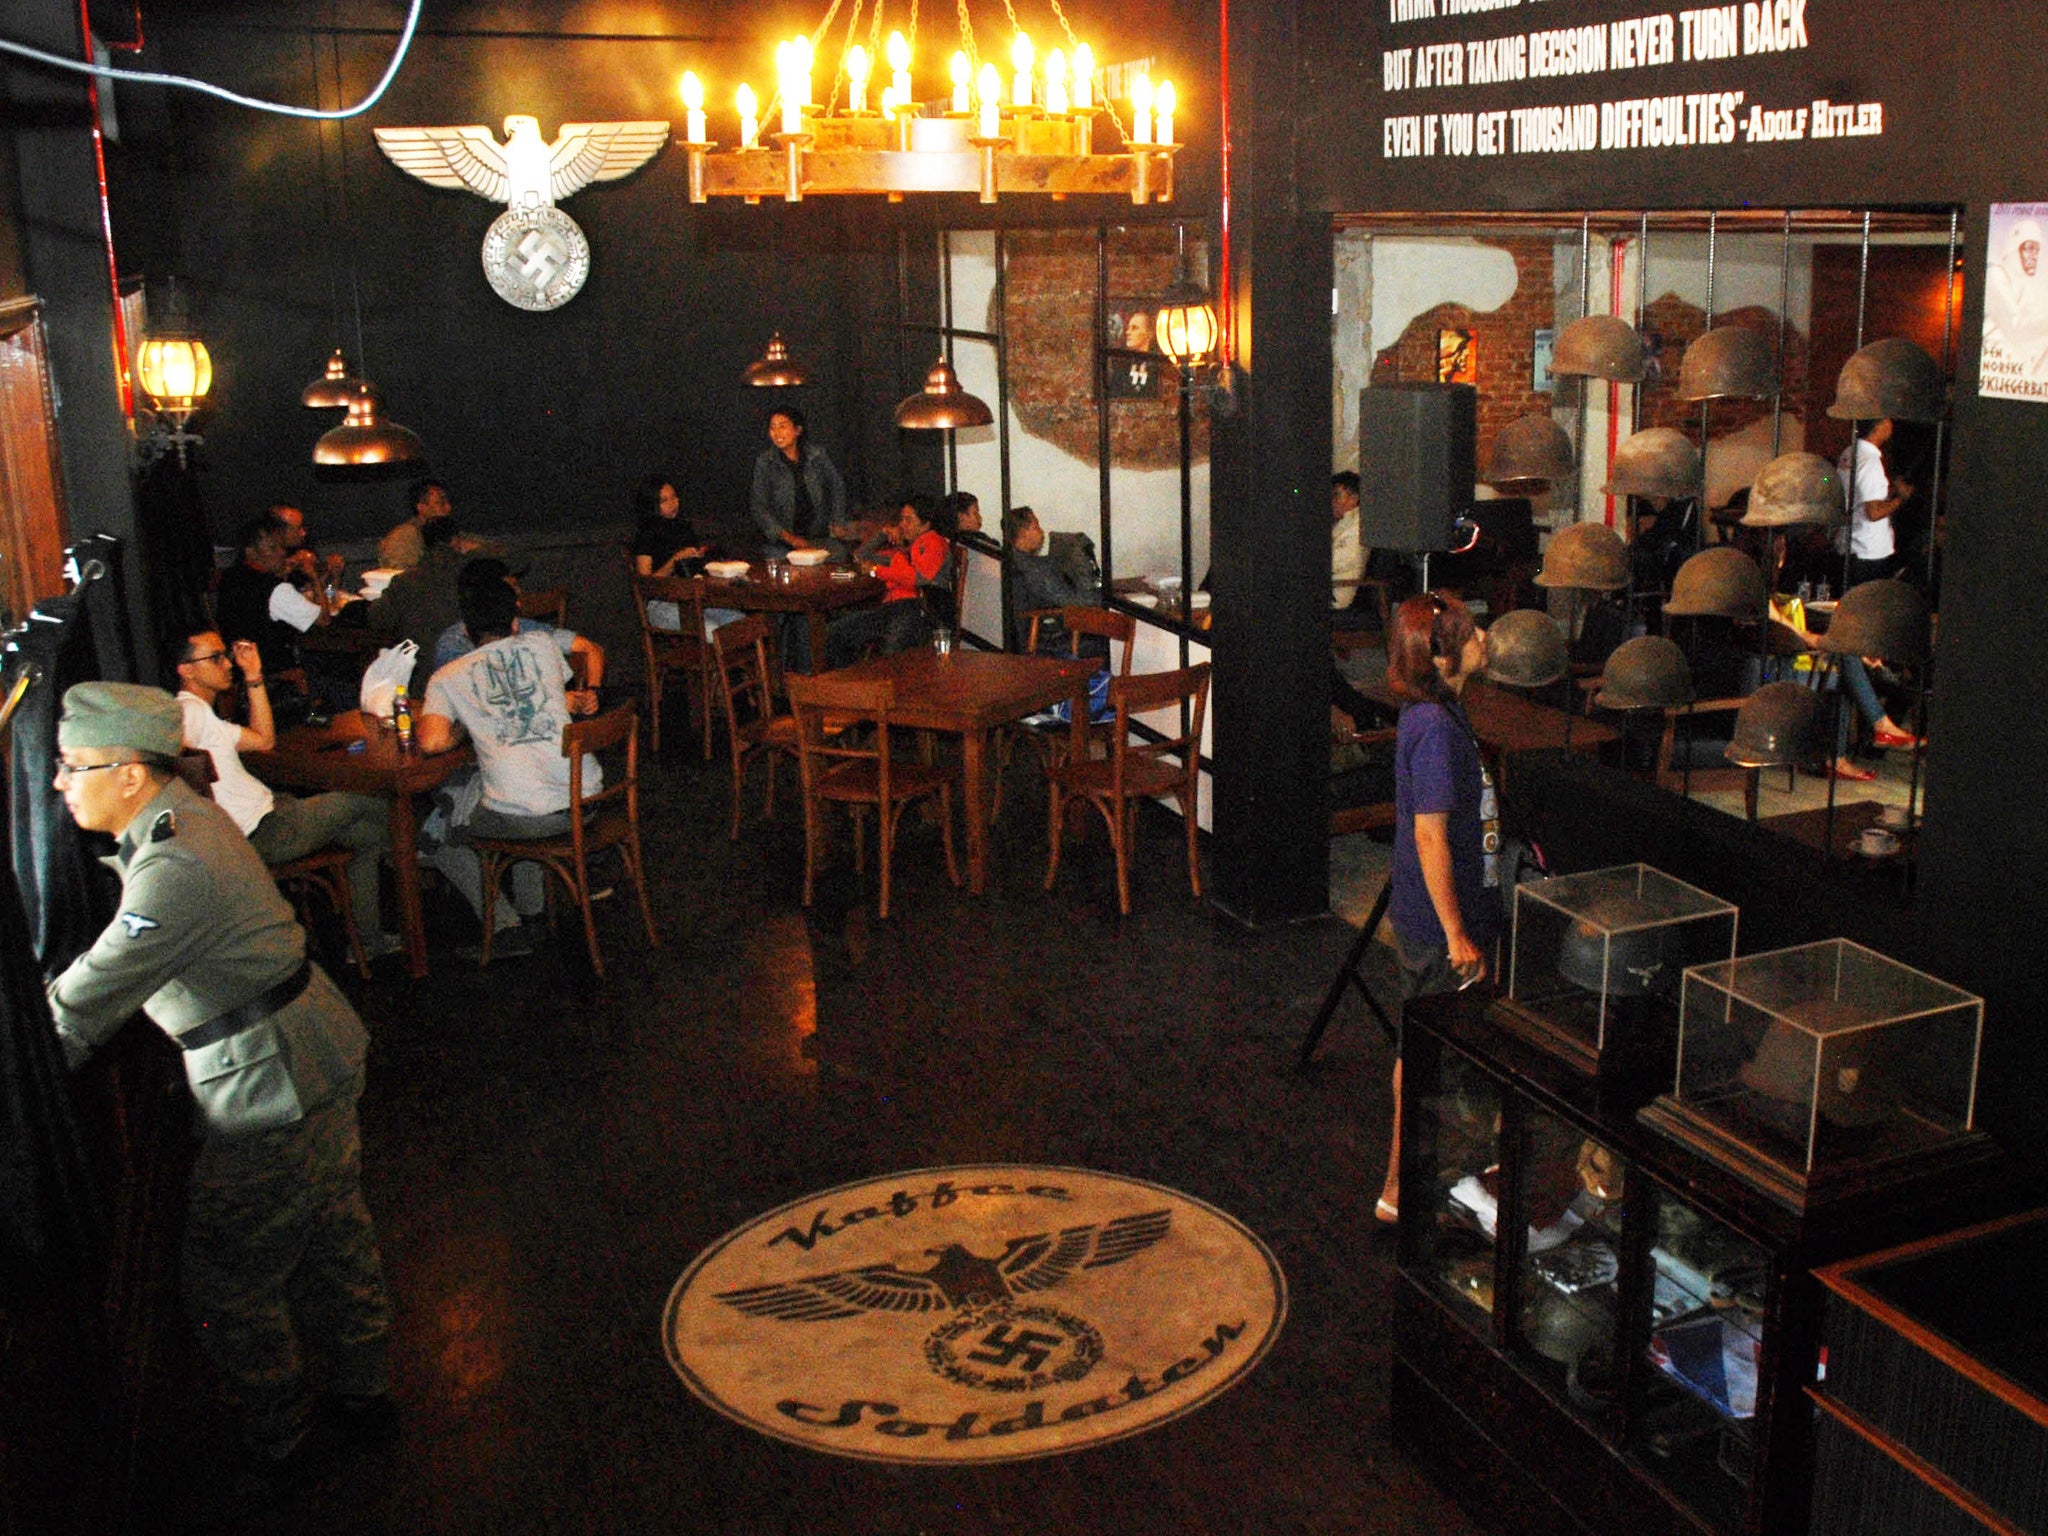 The cafe still features swastikas, Nazi insignia and a painting of Adolf Hitler, as well as a large Nazi emblem on the floor.